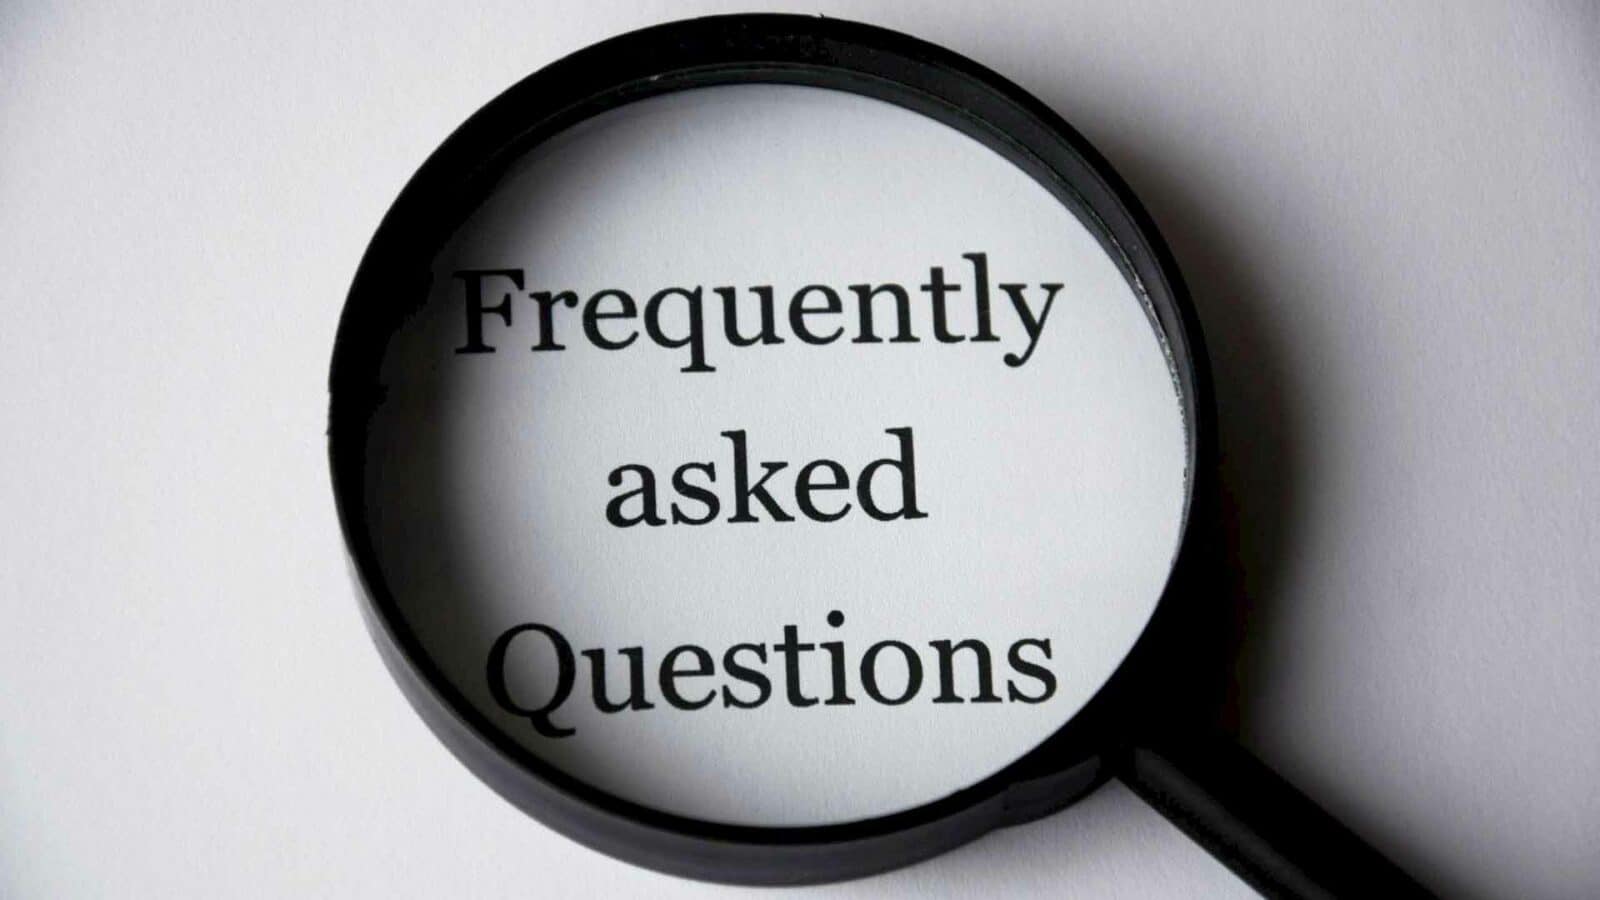 Frequently asked questions with a magnifying glass